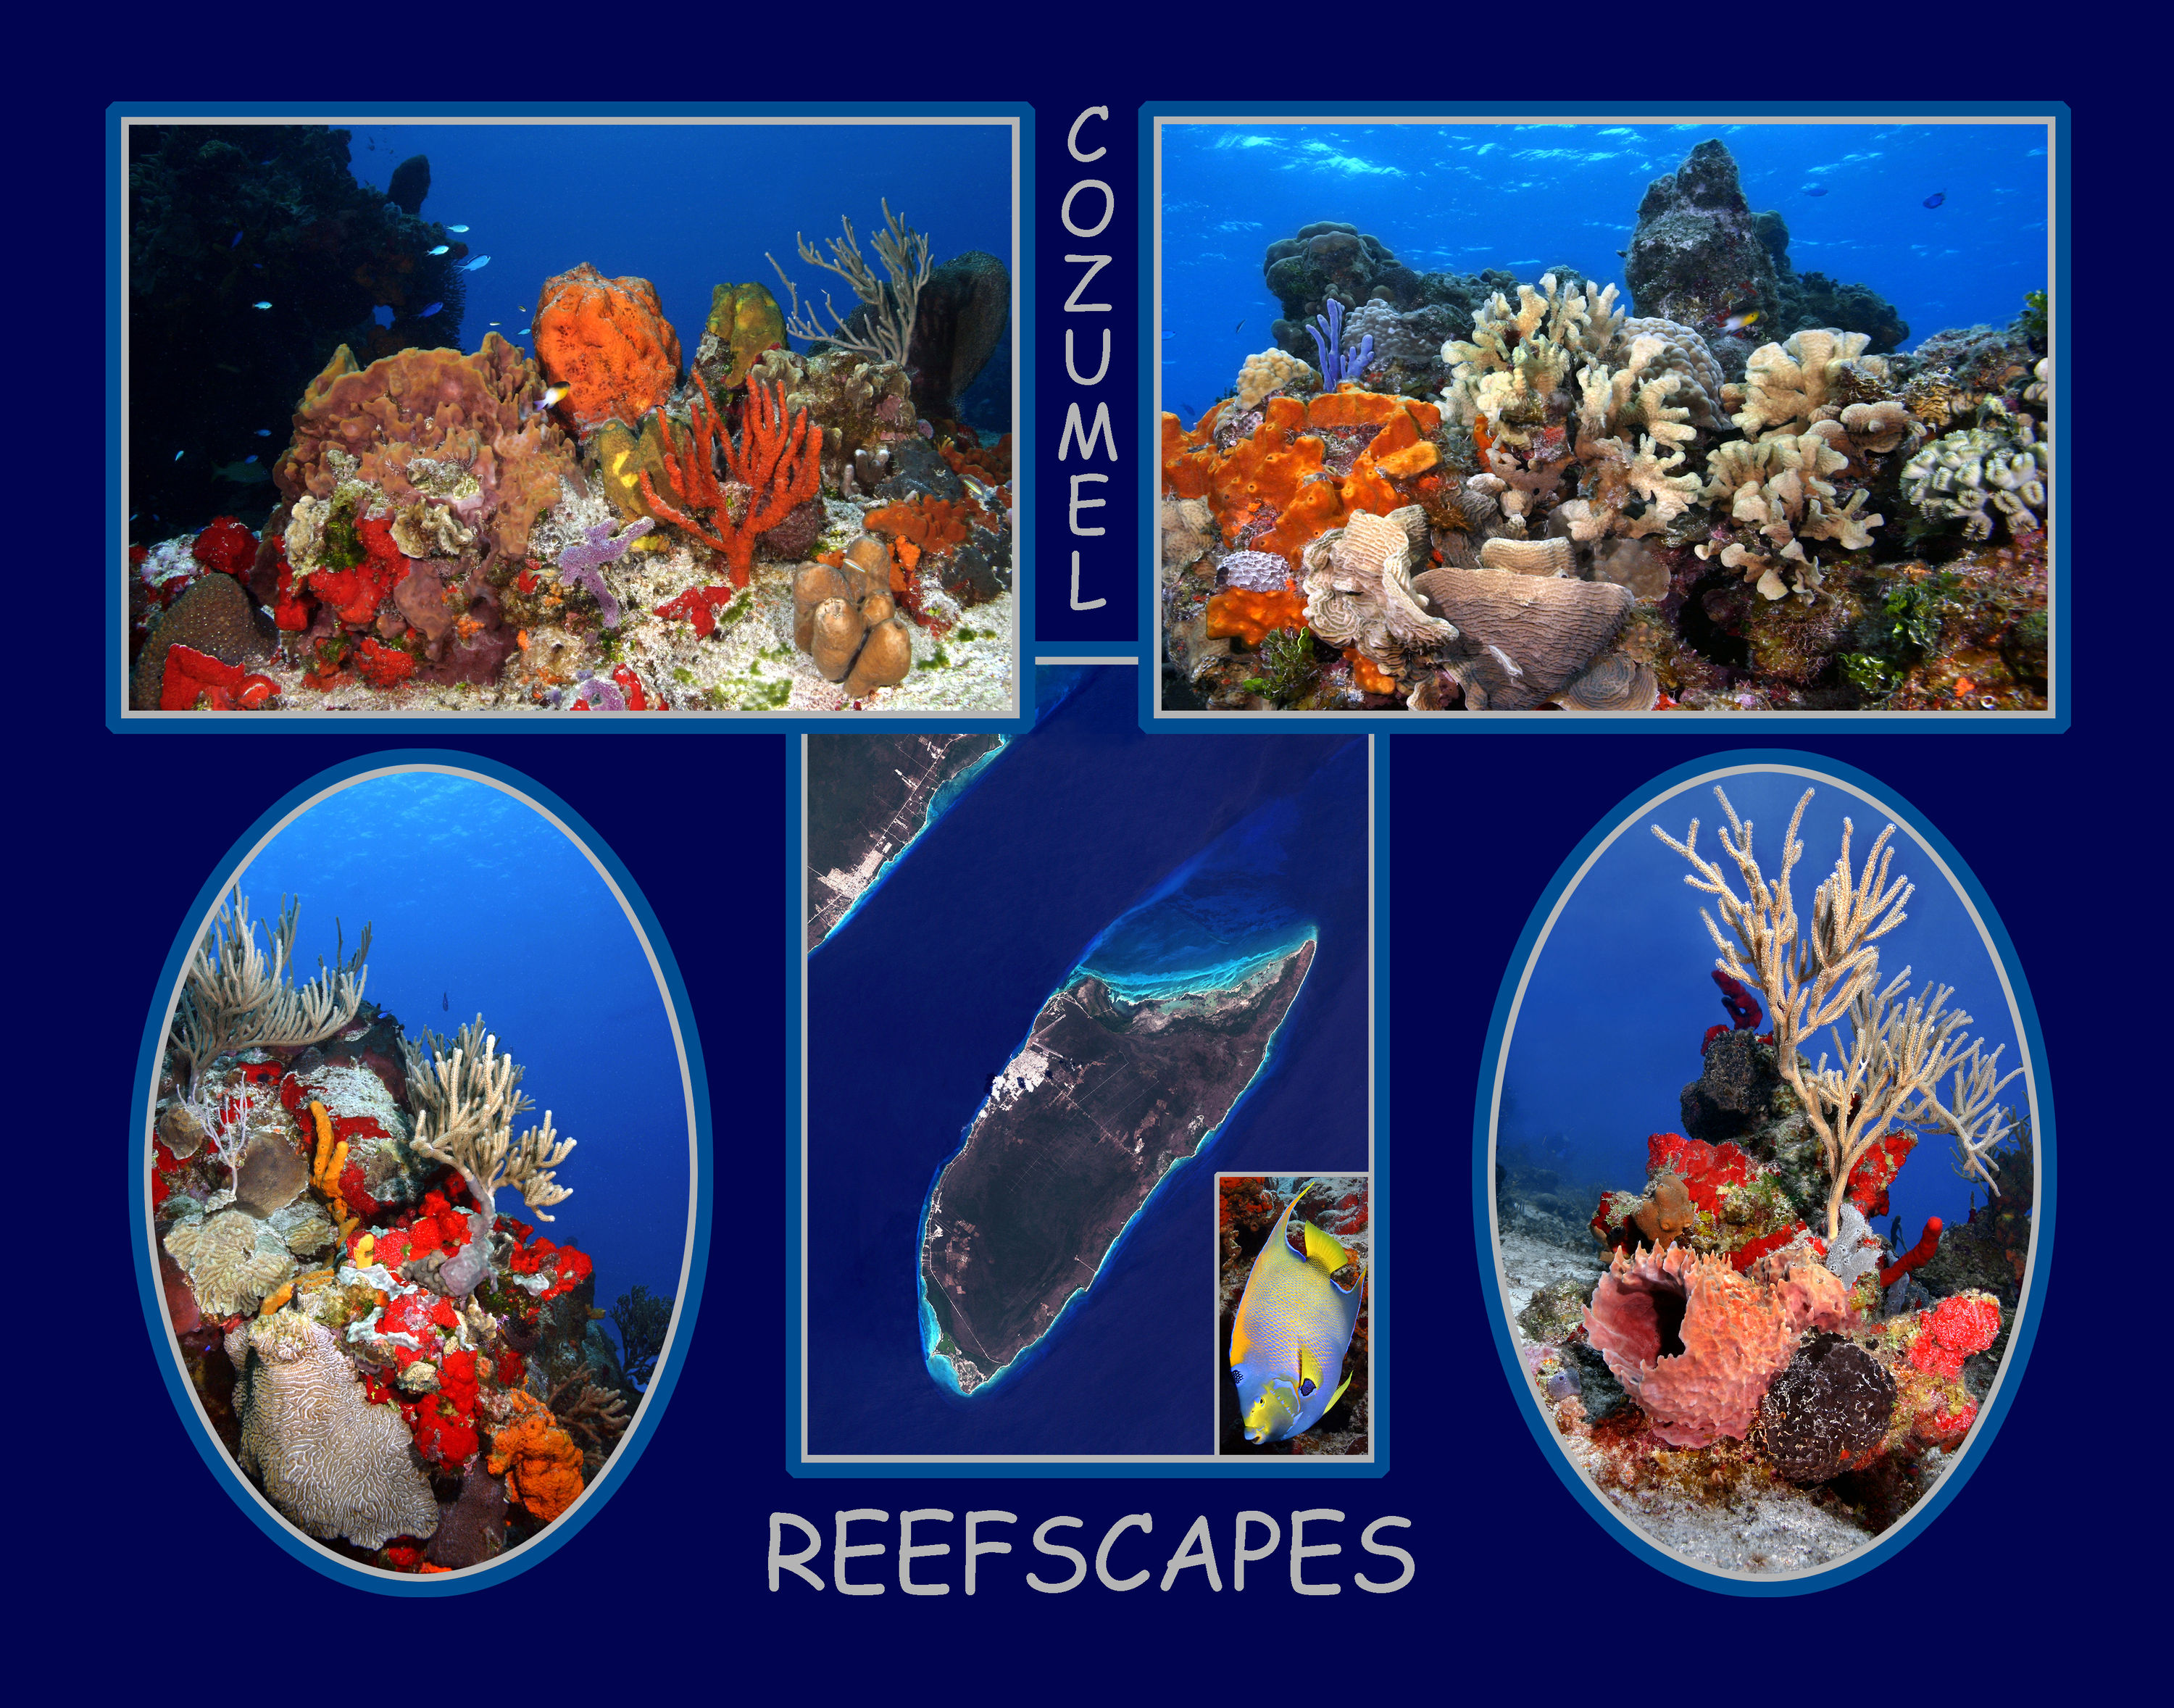 COZUMEL_REEFSCAPES_11-14_ANGEL